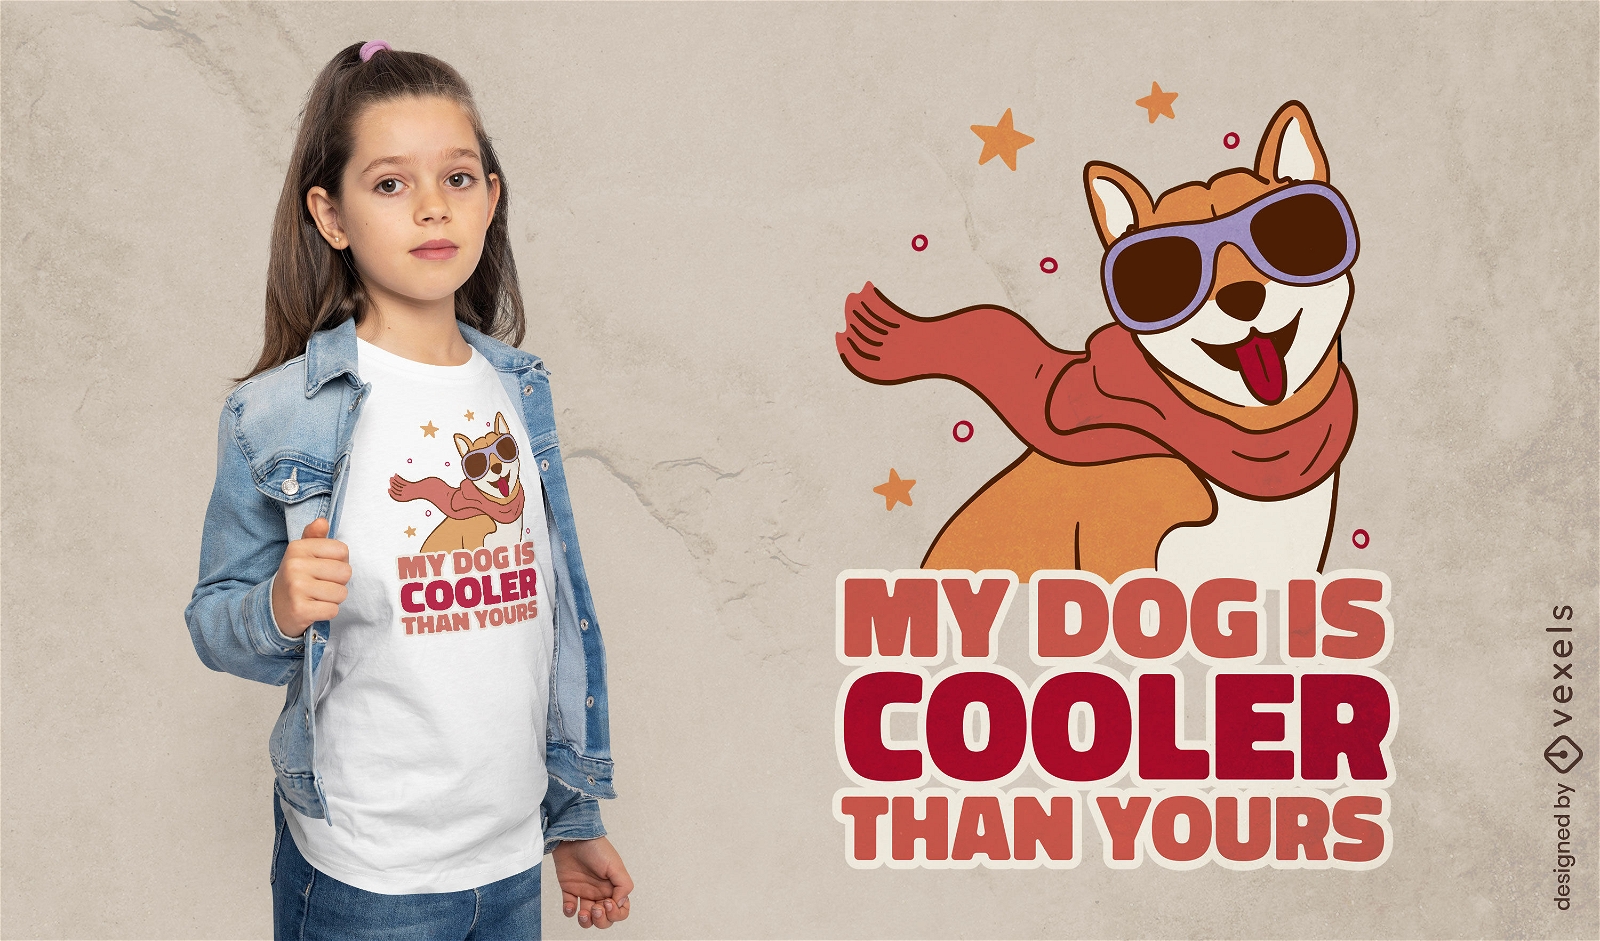 My dog is cooler than yours t-shirt design